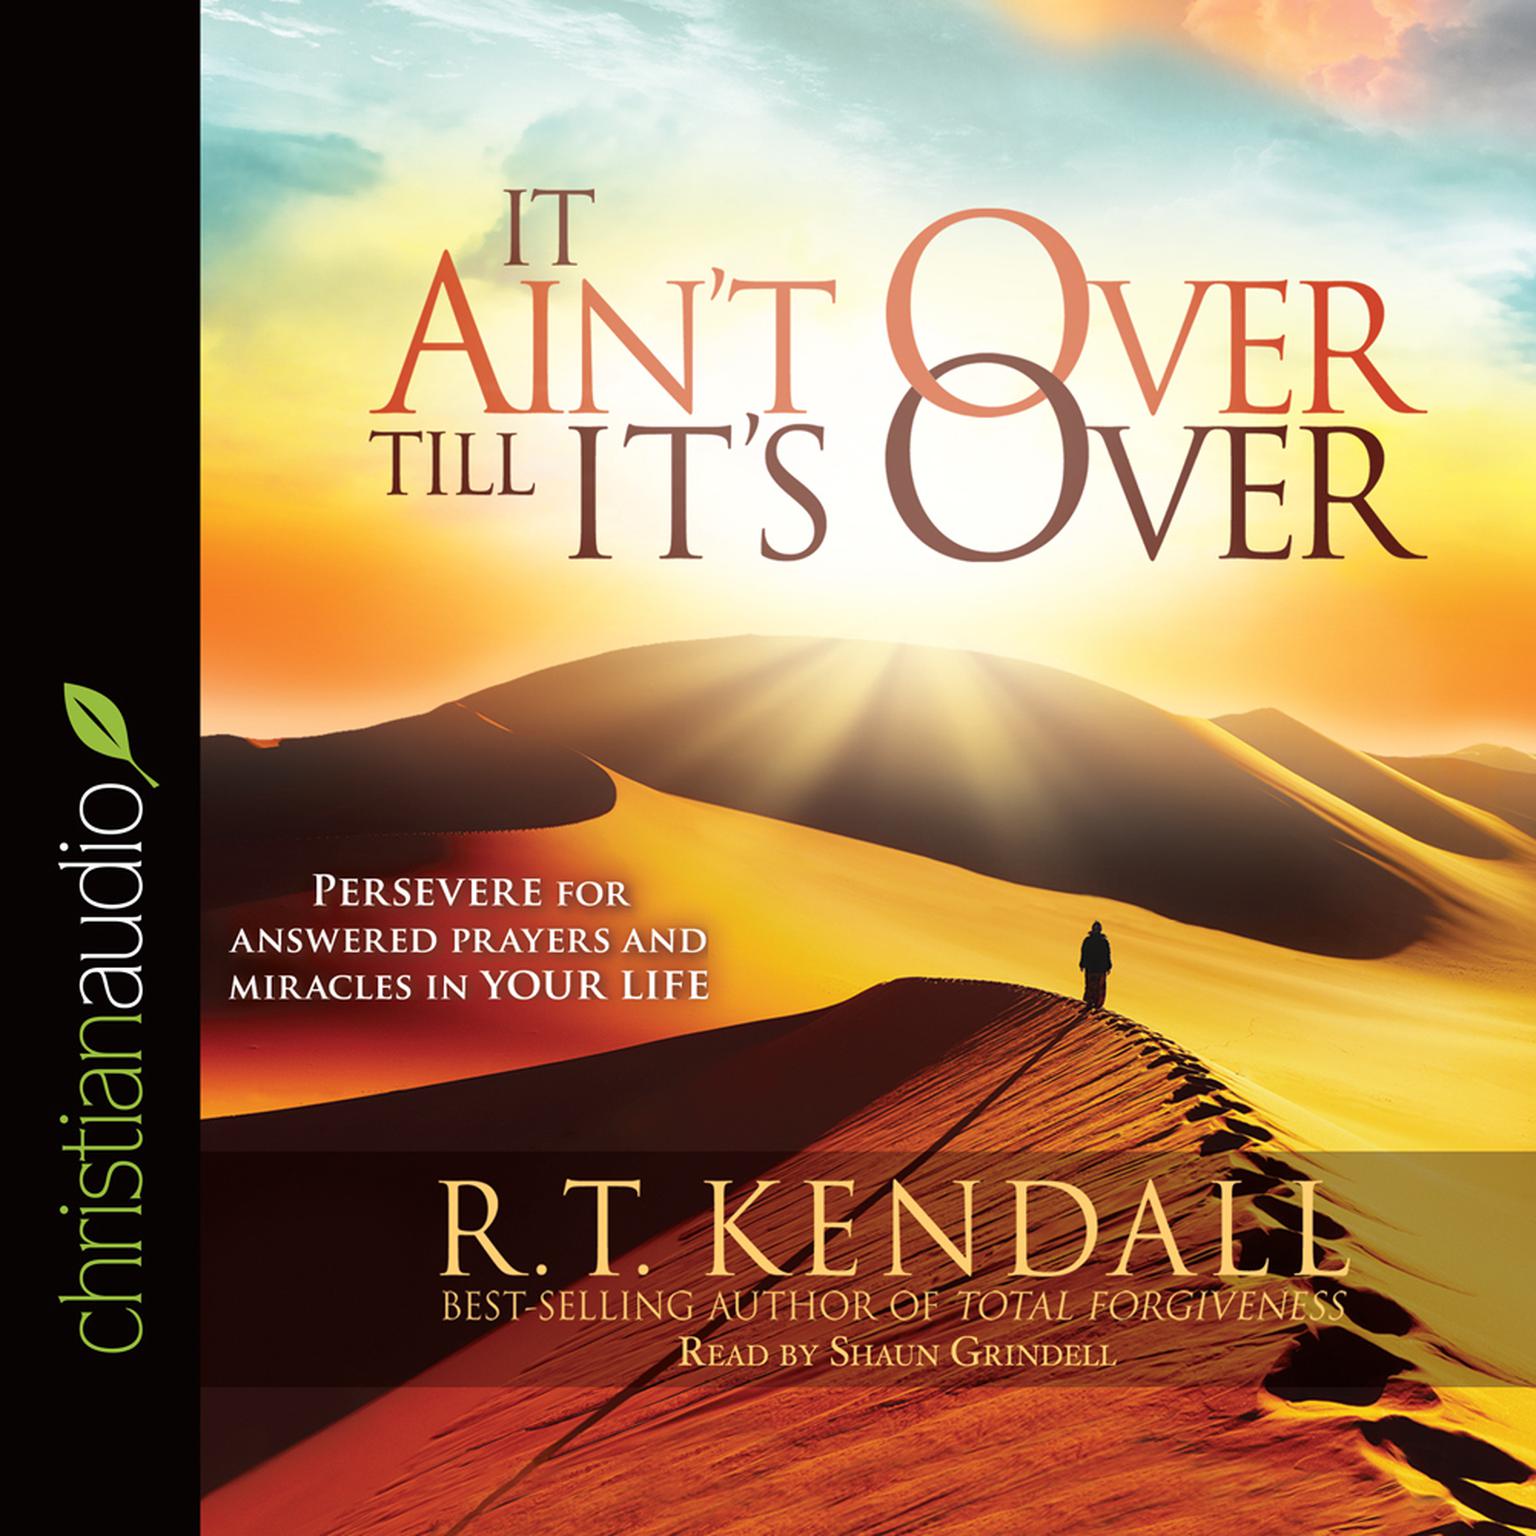 It Aint Over Till Its Over: Persevere for Answered Prayers and Miracles in Your Life Audiobook, by R. T. Kendall